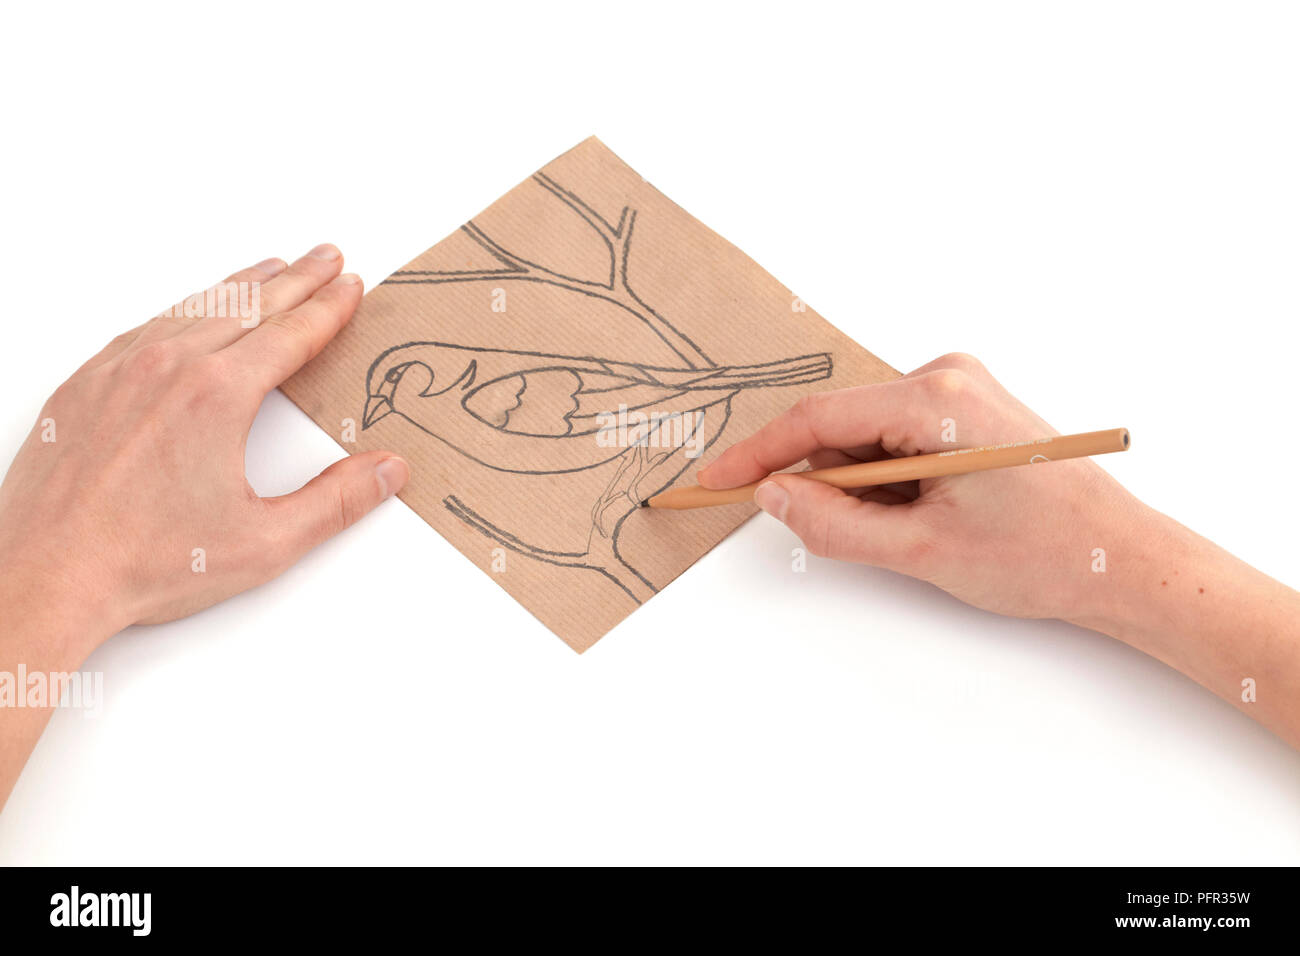 Drawing a design on a piece of brown paper, showing a bird on a tree (design for a mosaic) Stock Photo